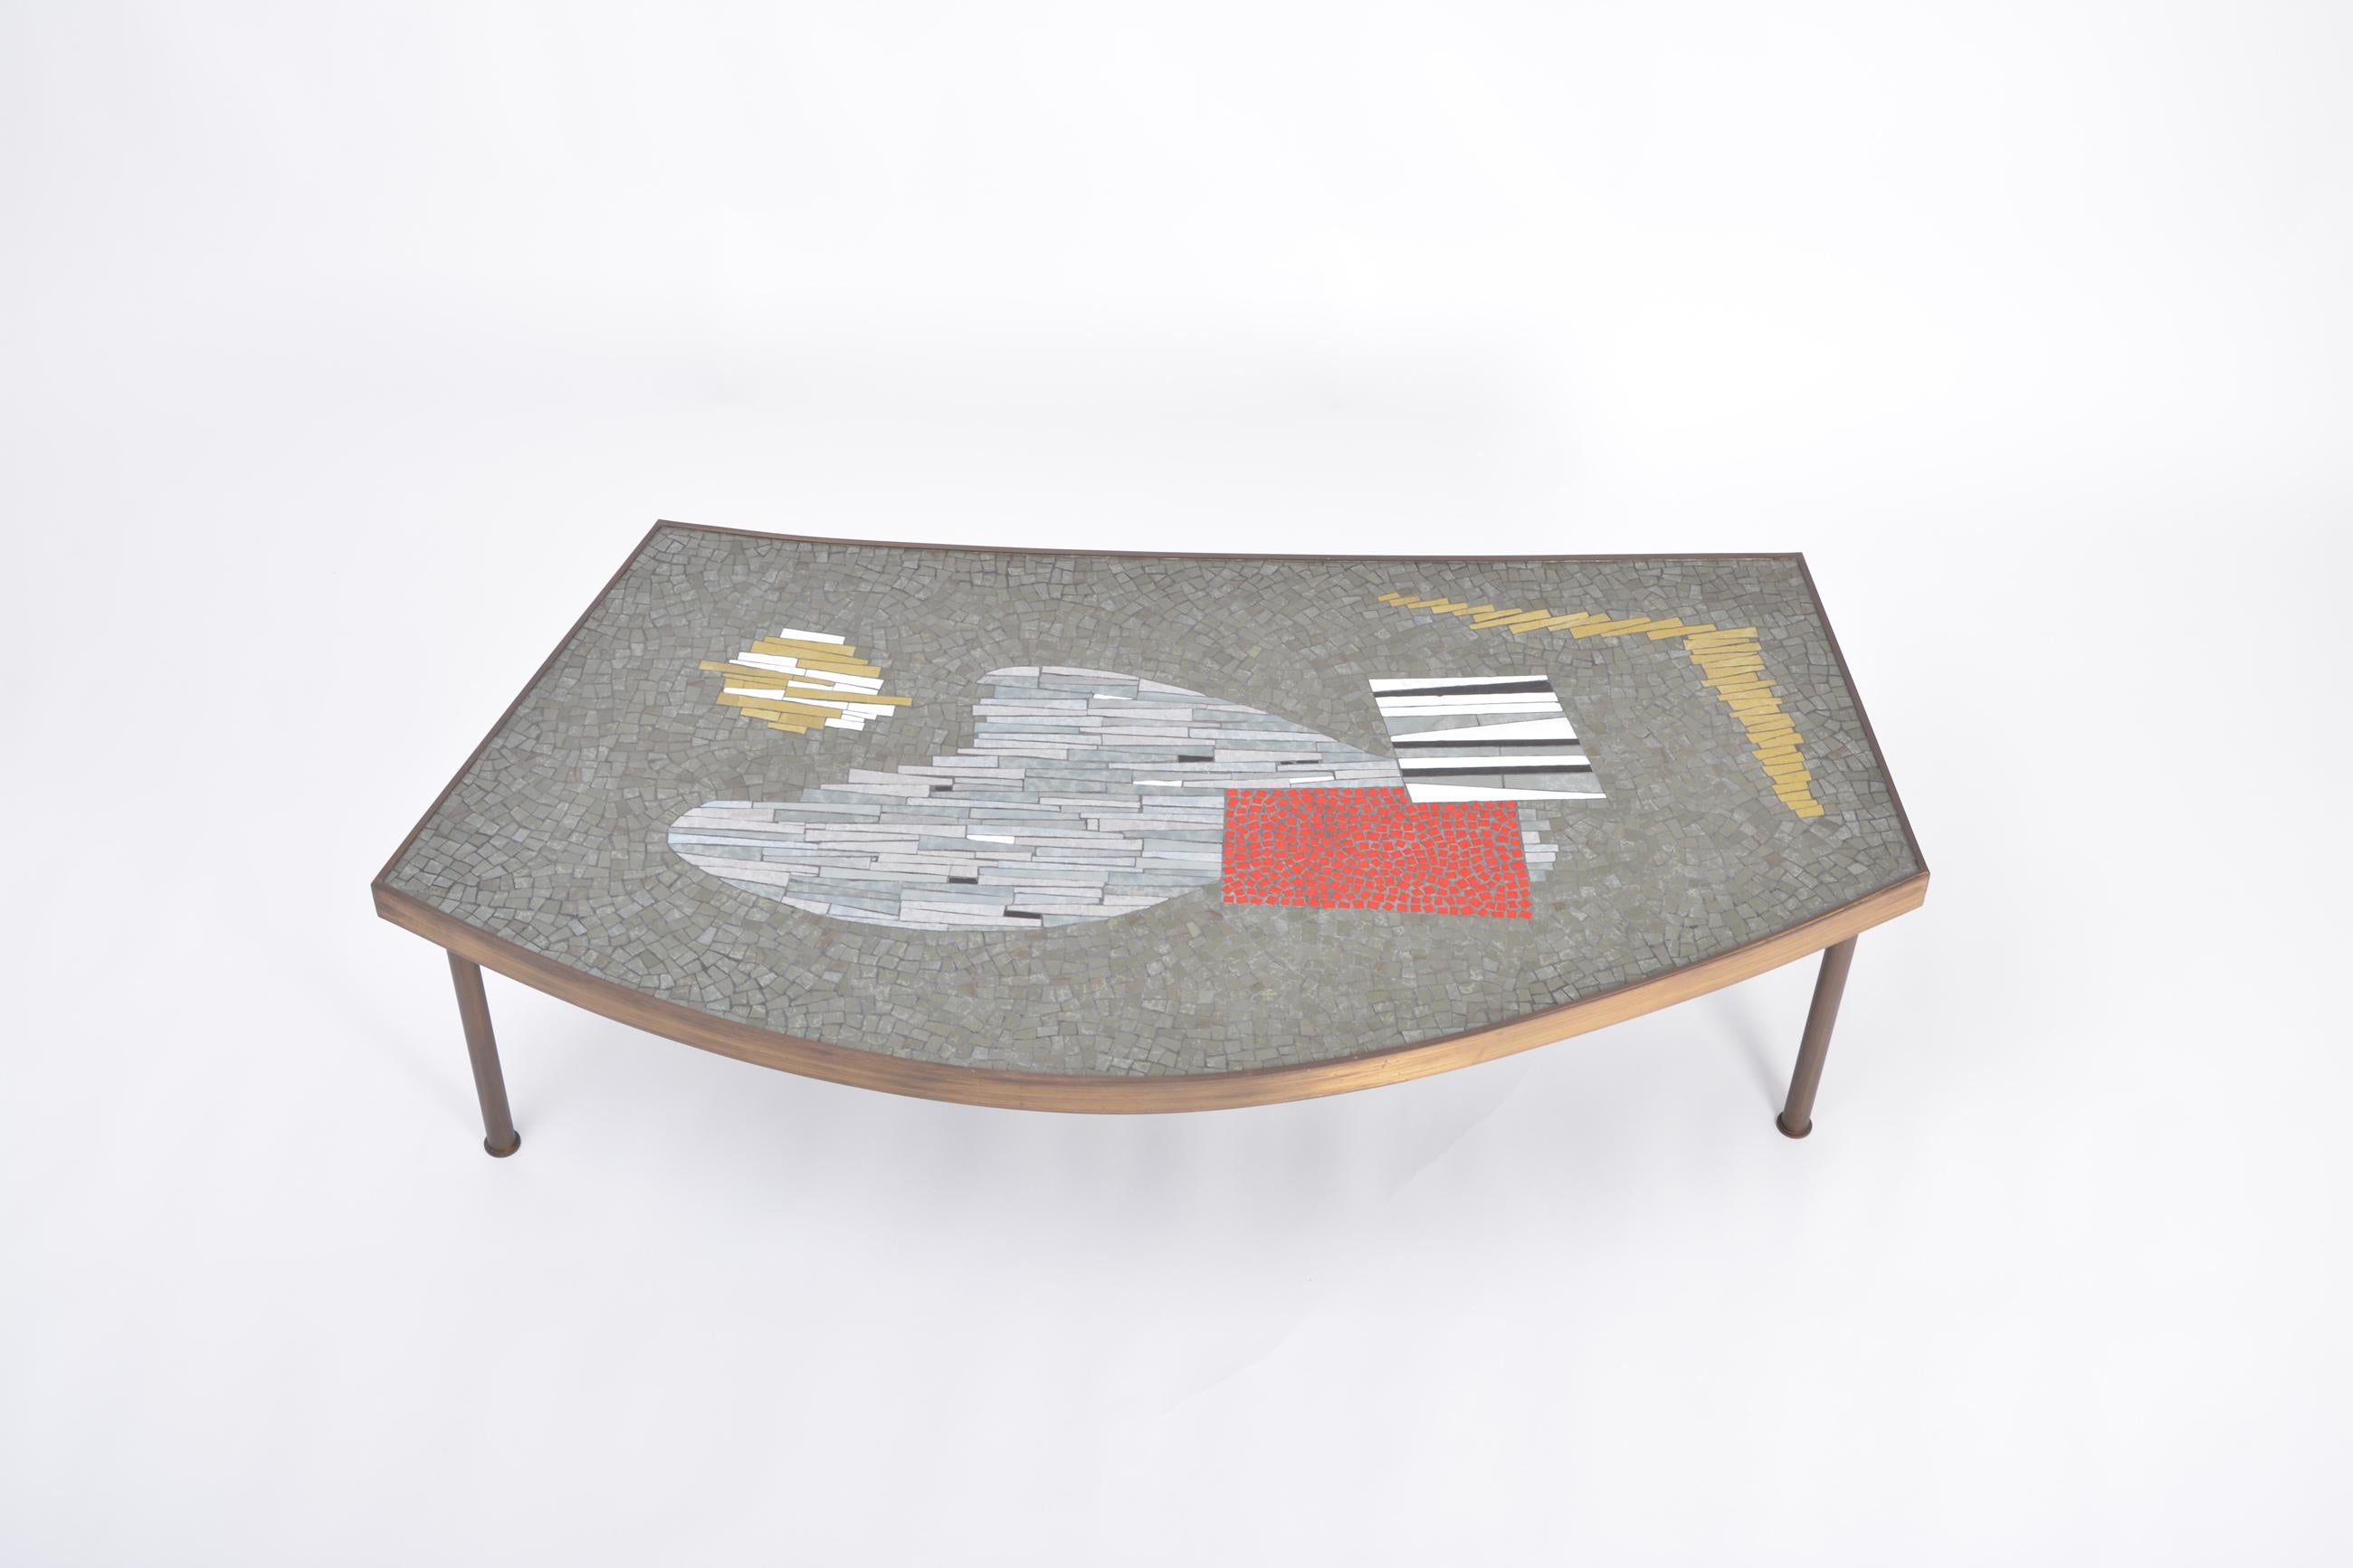 Large Midcentury Mosaic and Brass Coffee Table by Berthold Müller-Oerlinghausen For Sale 2